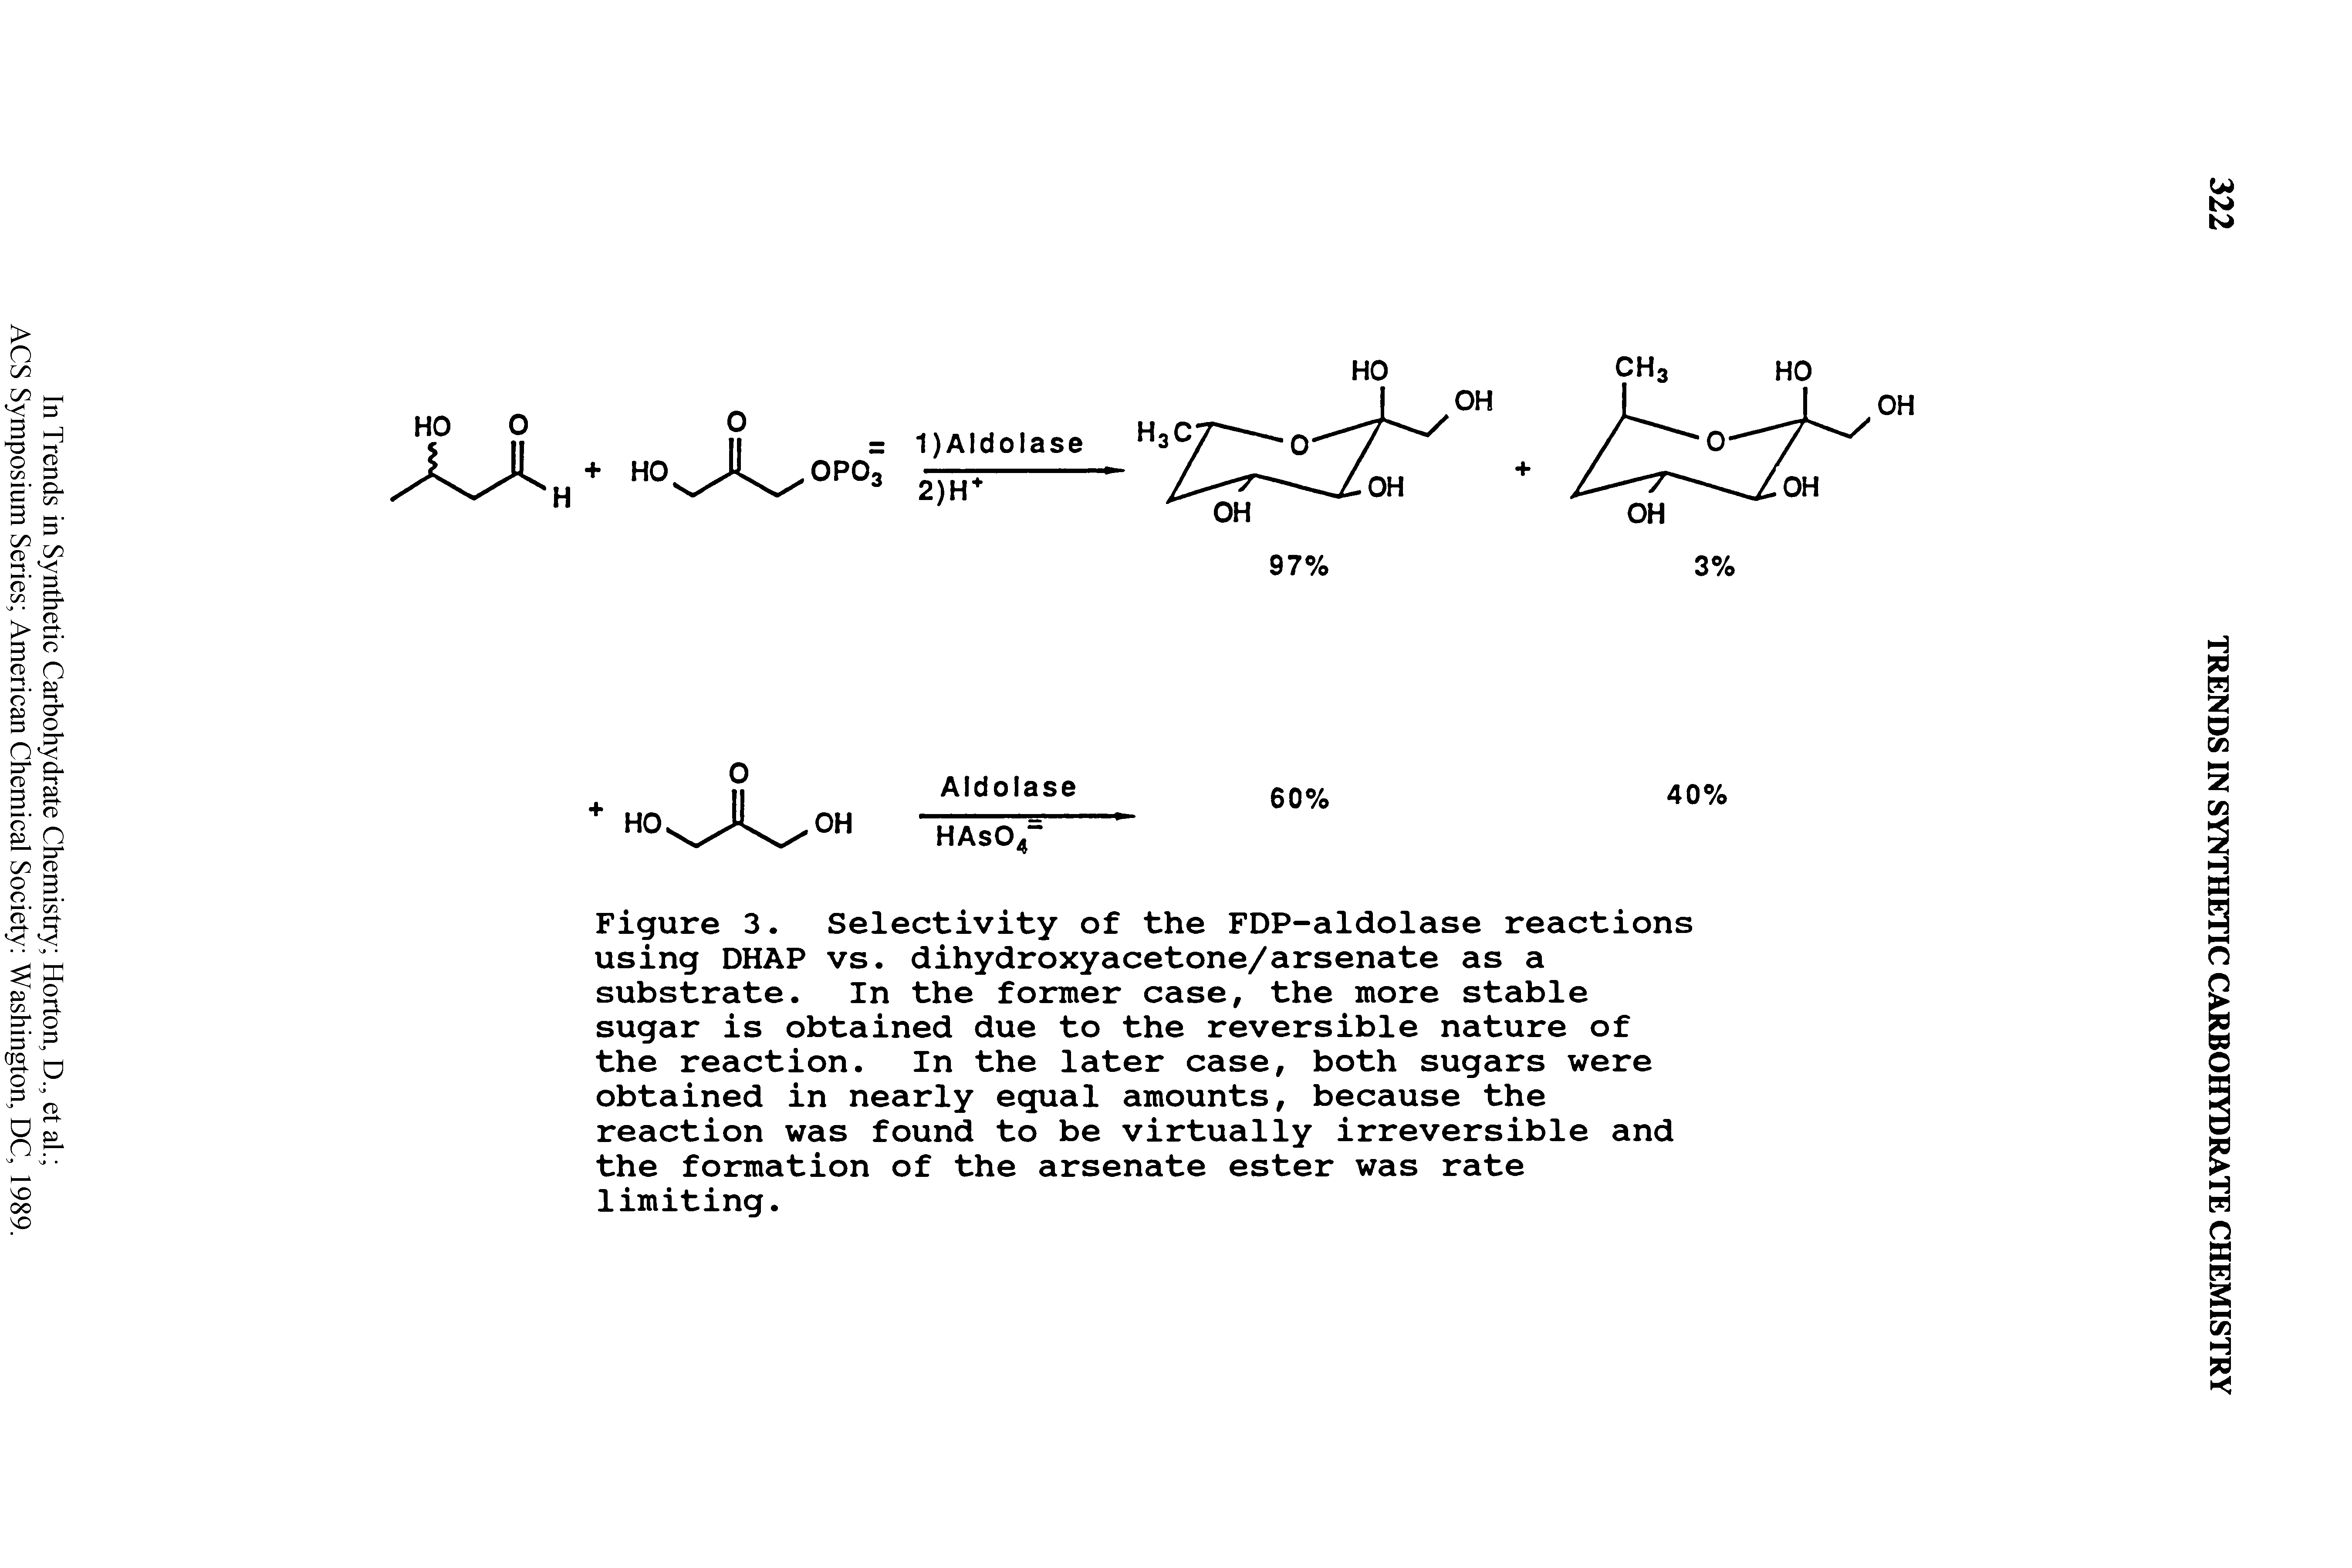 Figure 3. Selectivity of the FDP-aldolase reactions using DHAP vs. dihydroxyacetone/arsenate as a substrate. In the former case, the more stable sugar is obtained due to the reversible nature of the reaction. In the later case, both sugars were obtained in nearly equal amounts, because the reaction was found to be virtually irreversible and the formation of the arsenate ester was rate limiting.